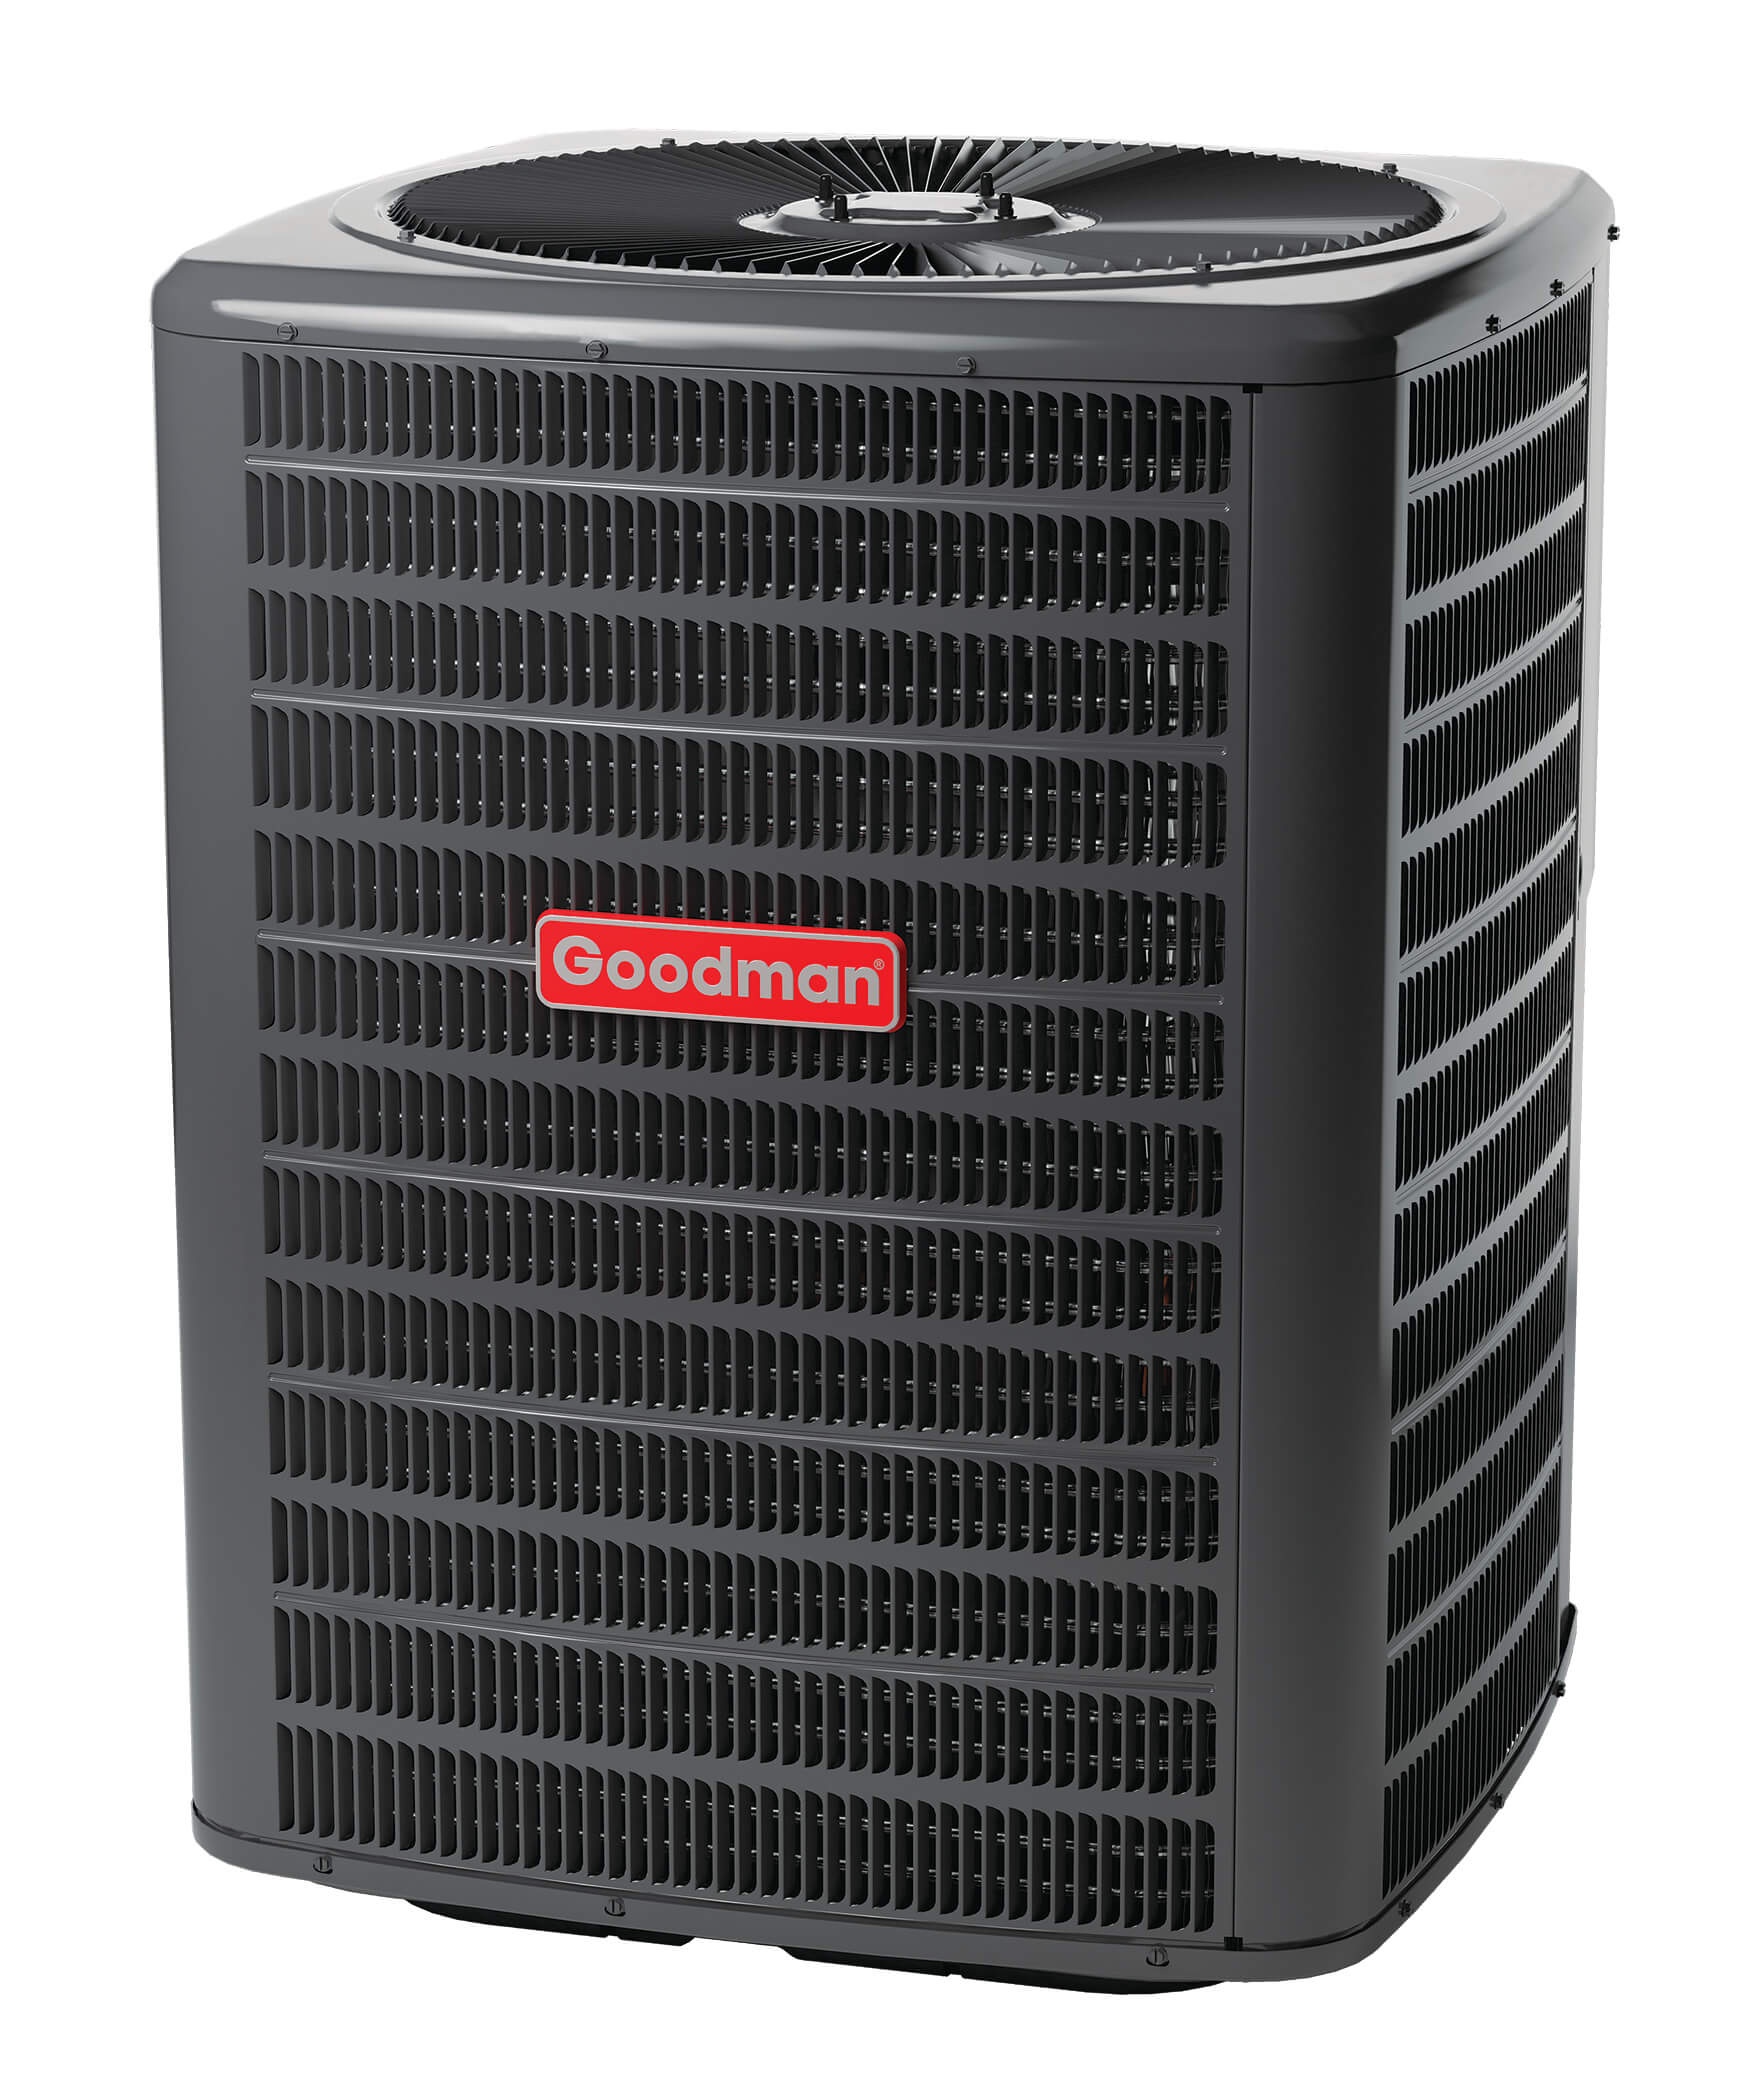 Heat Pump Service In Hamilton, ON And Surrounding Areas